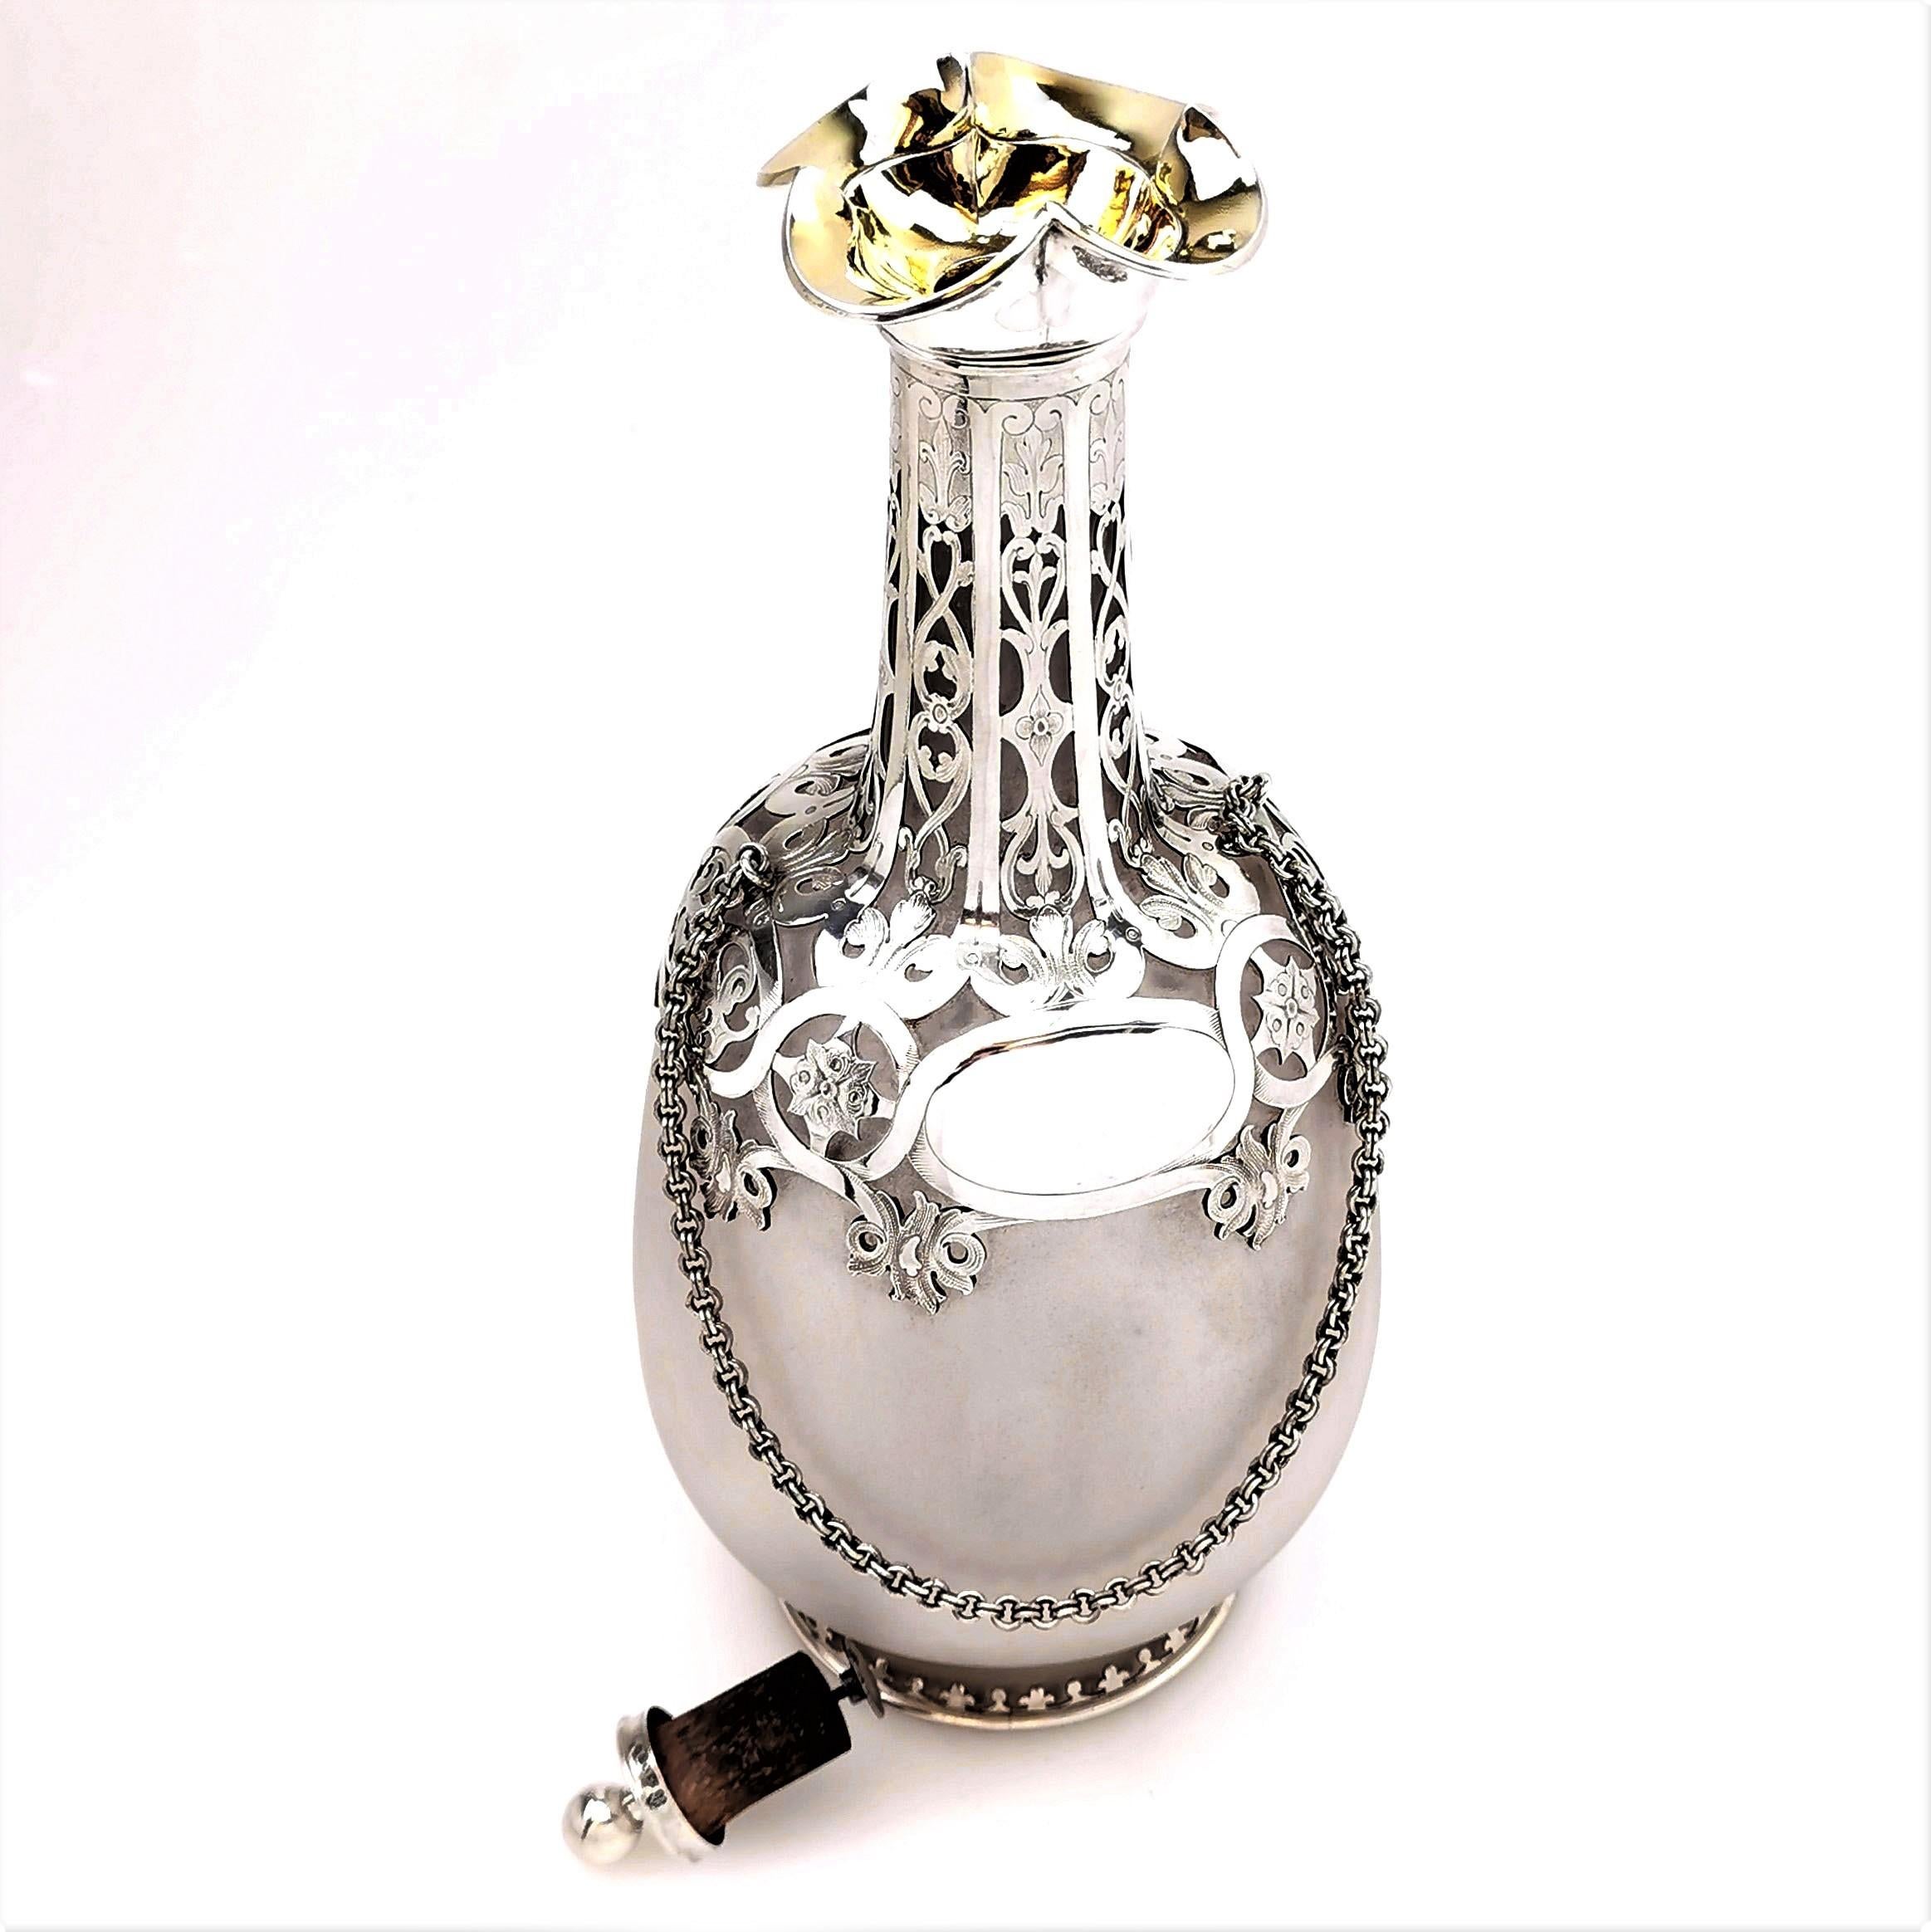 19th Century Antique Victorian Silver and Glass 'Pilgrims Flask' Decanter 1859 Wine Whisky